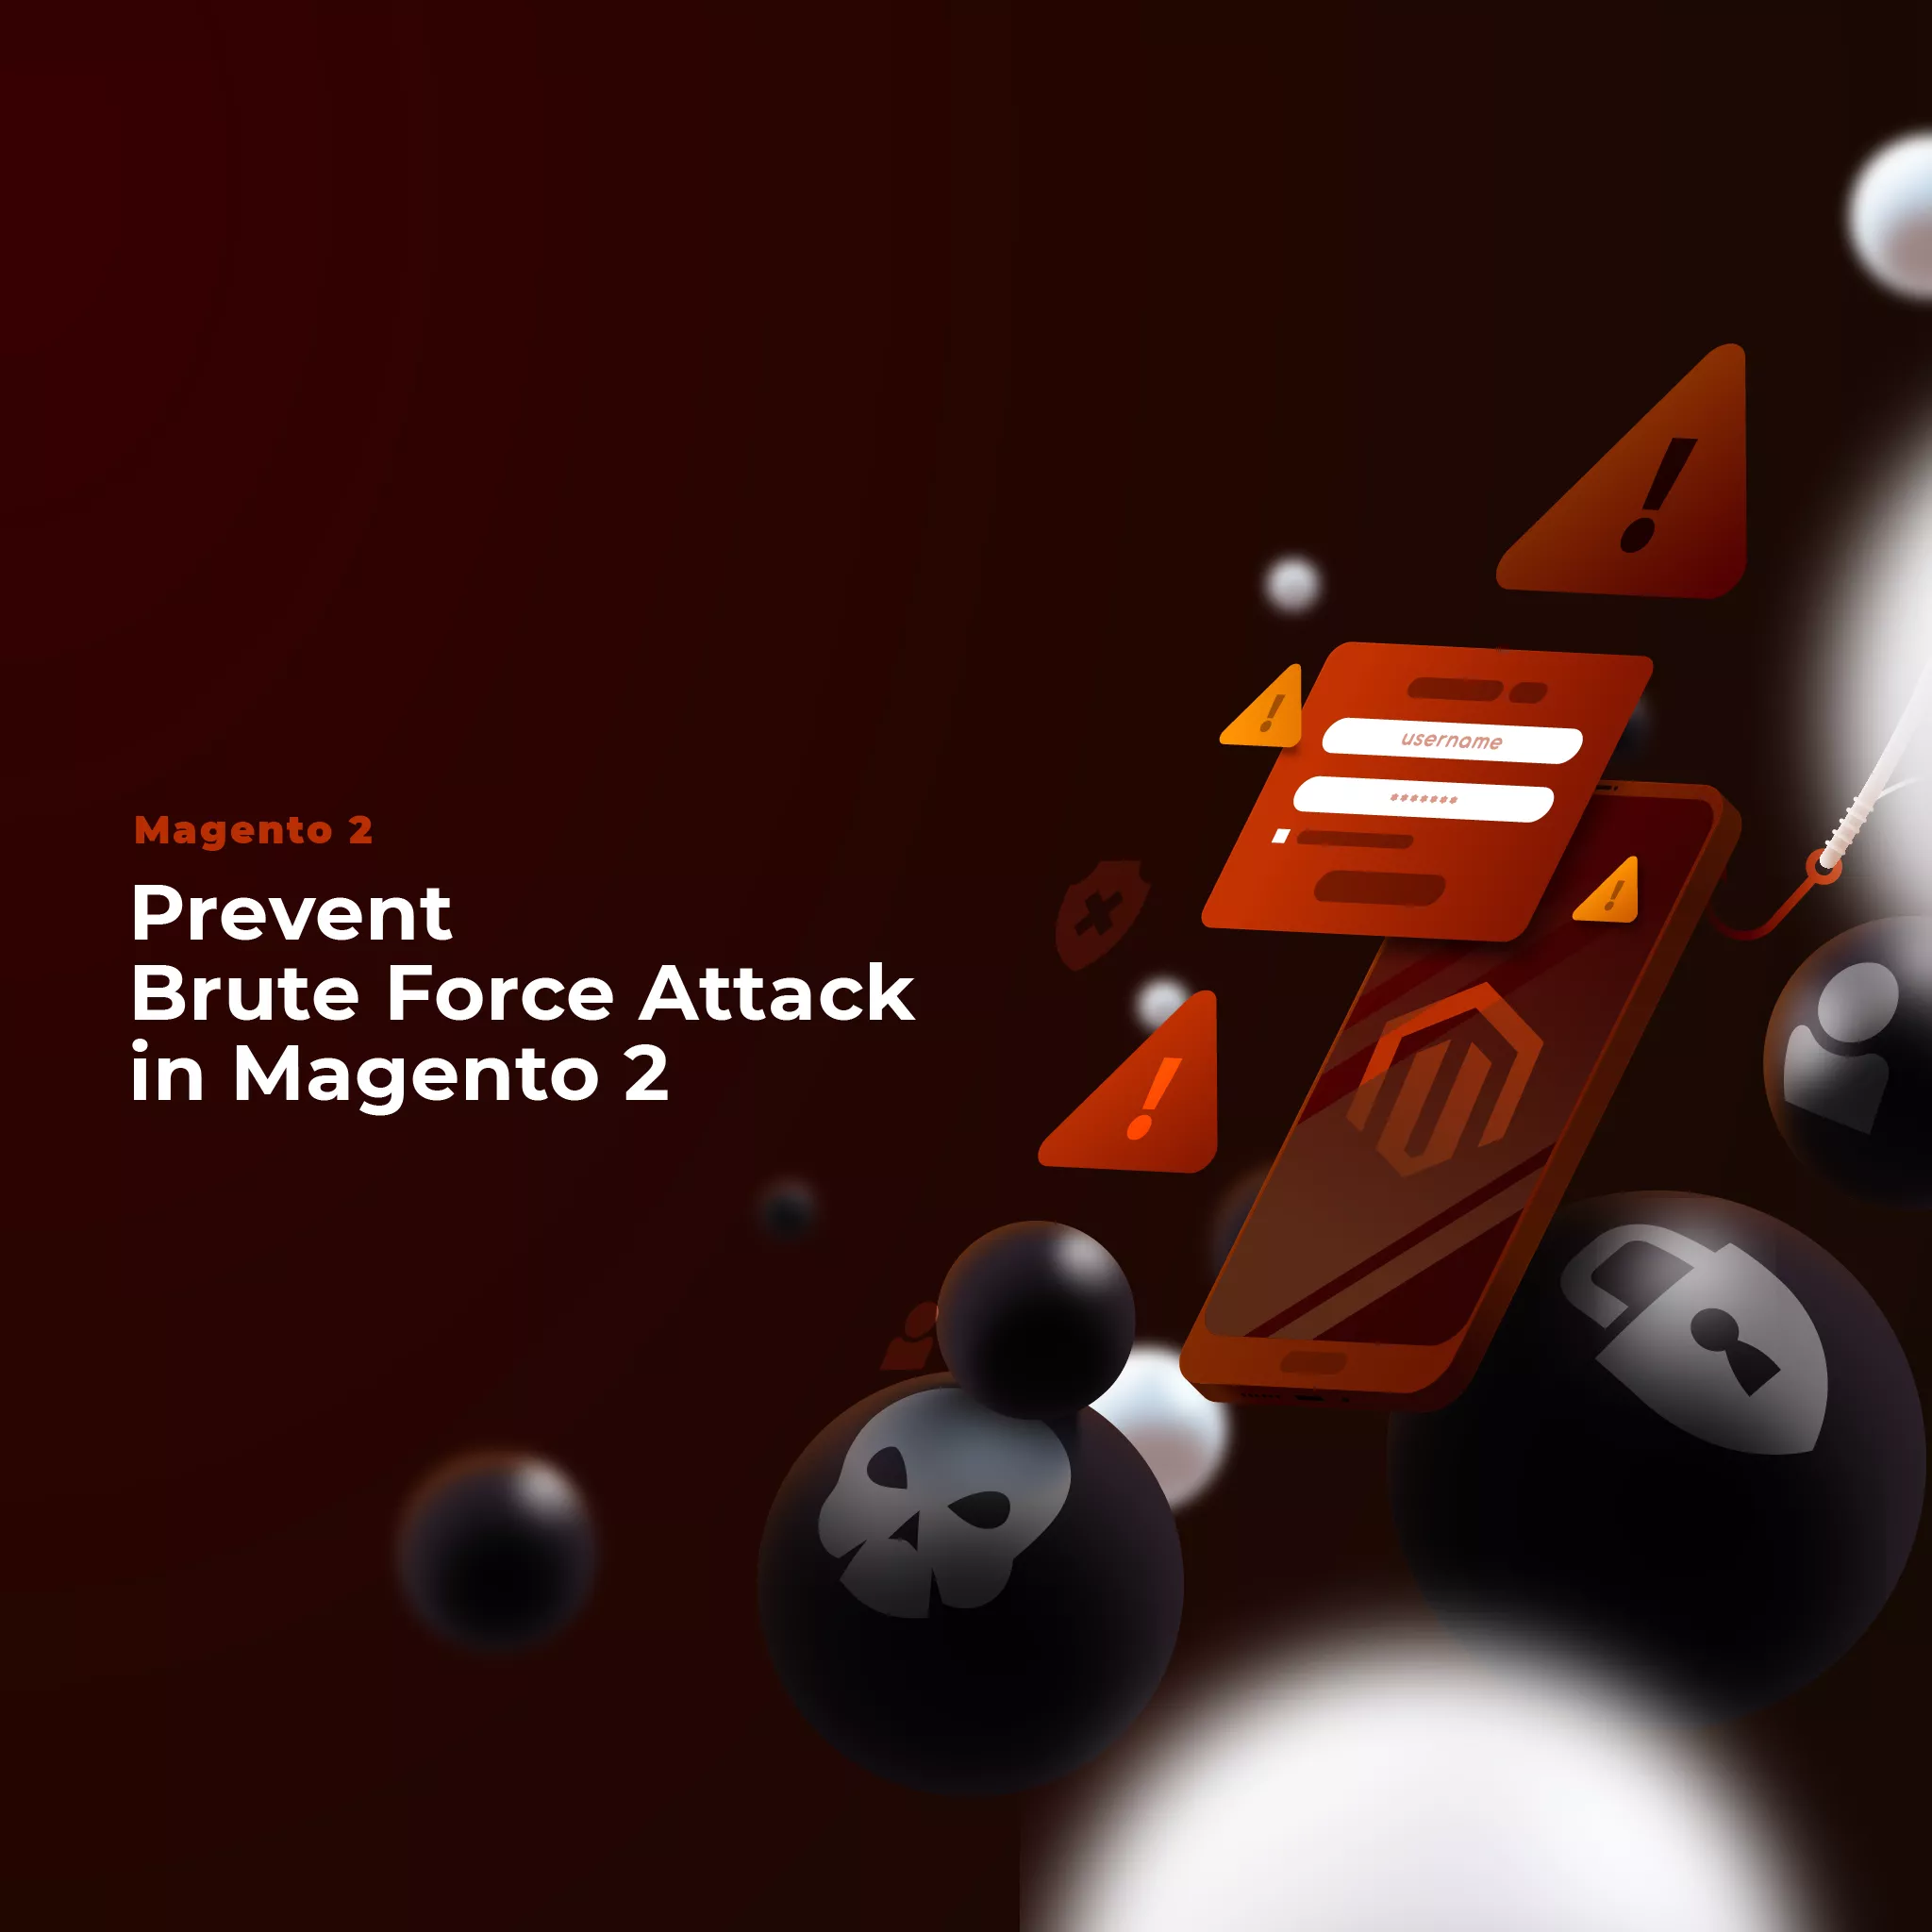 Image illustrating Magento login with danger symbols, highlighting prevention of brute force attack in Magento 2.